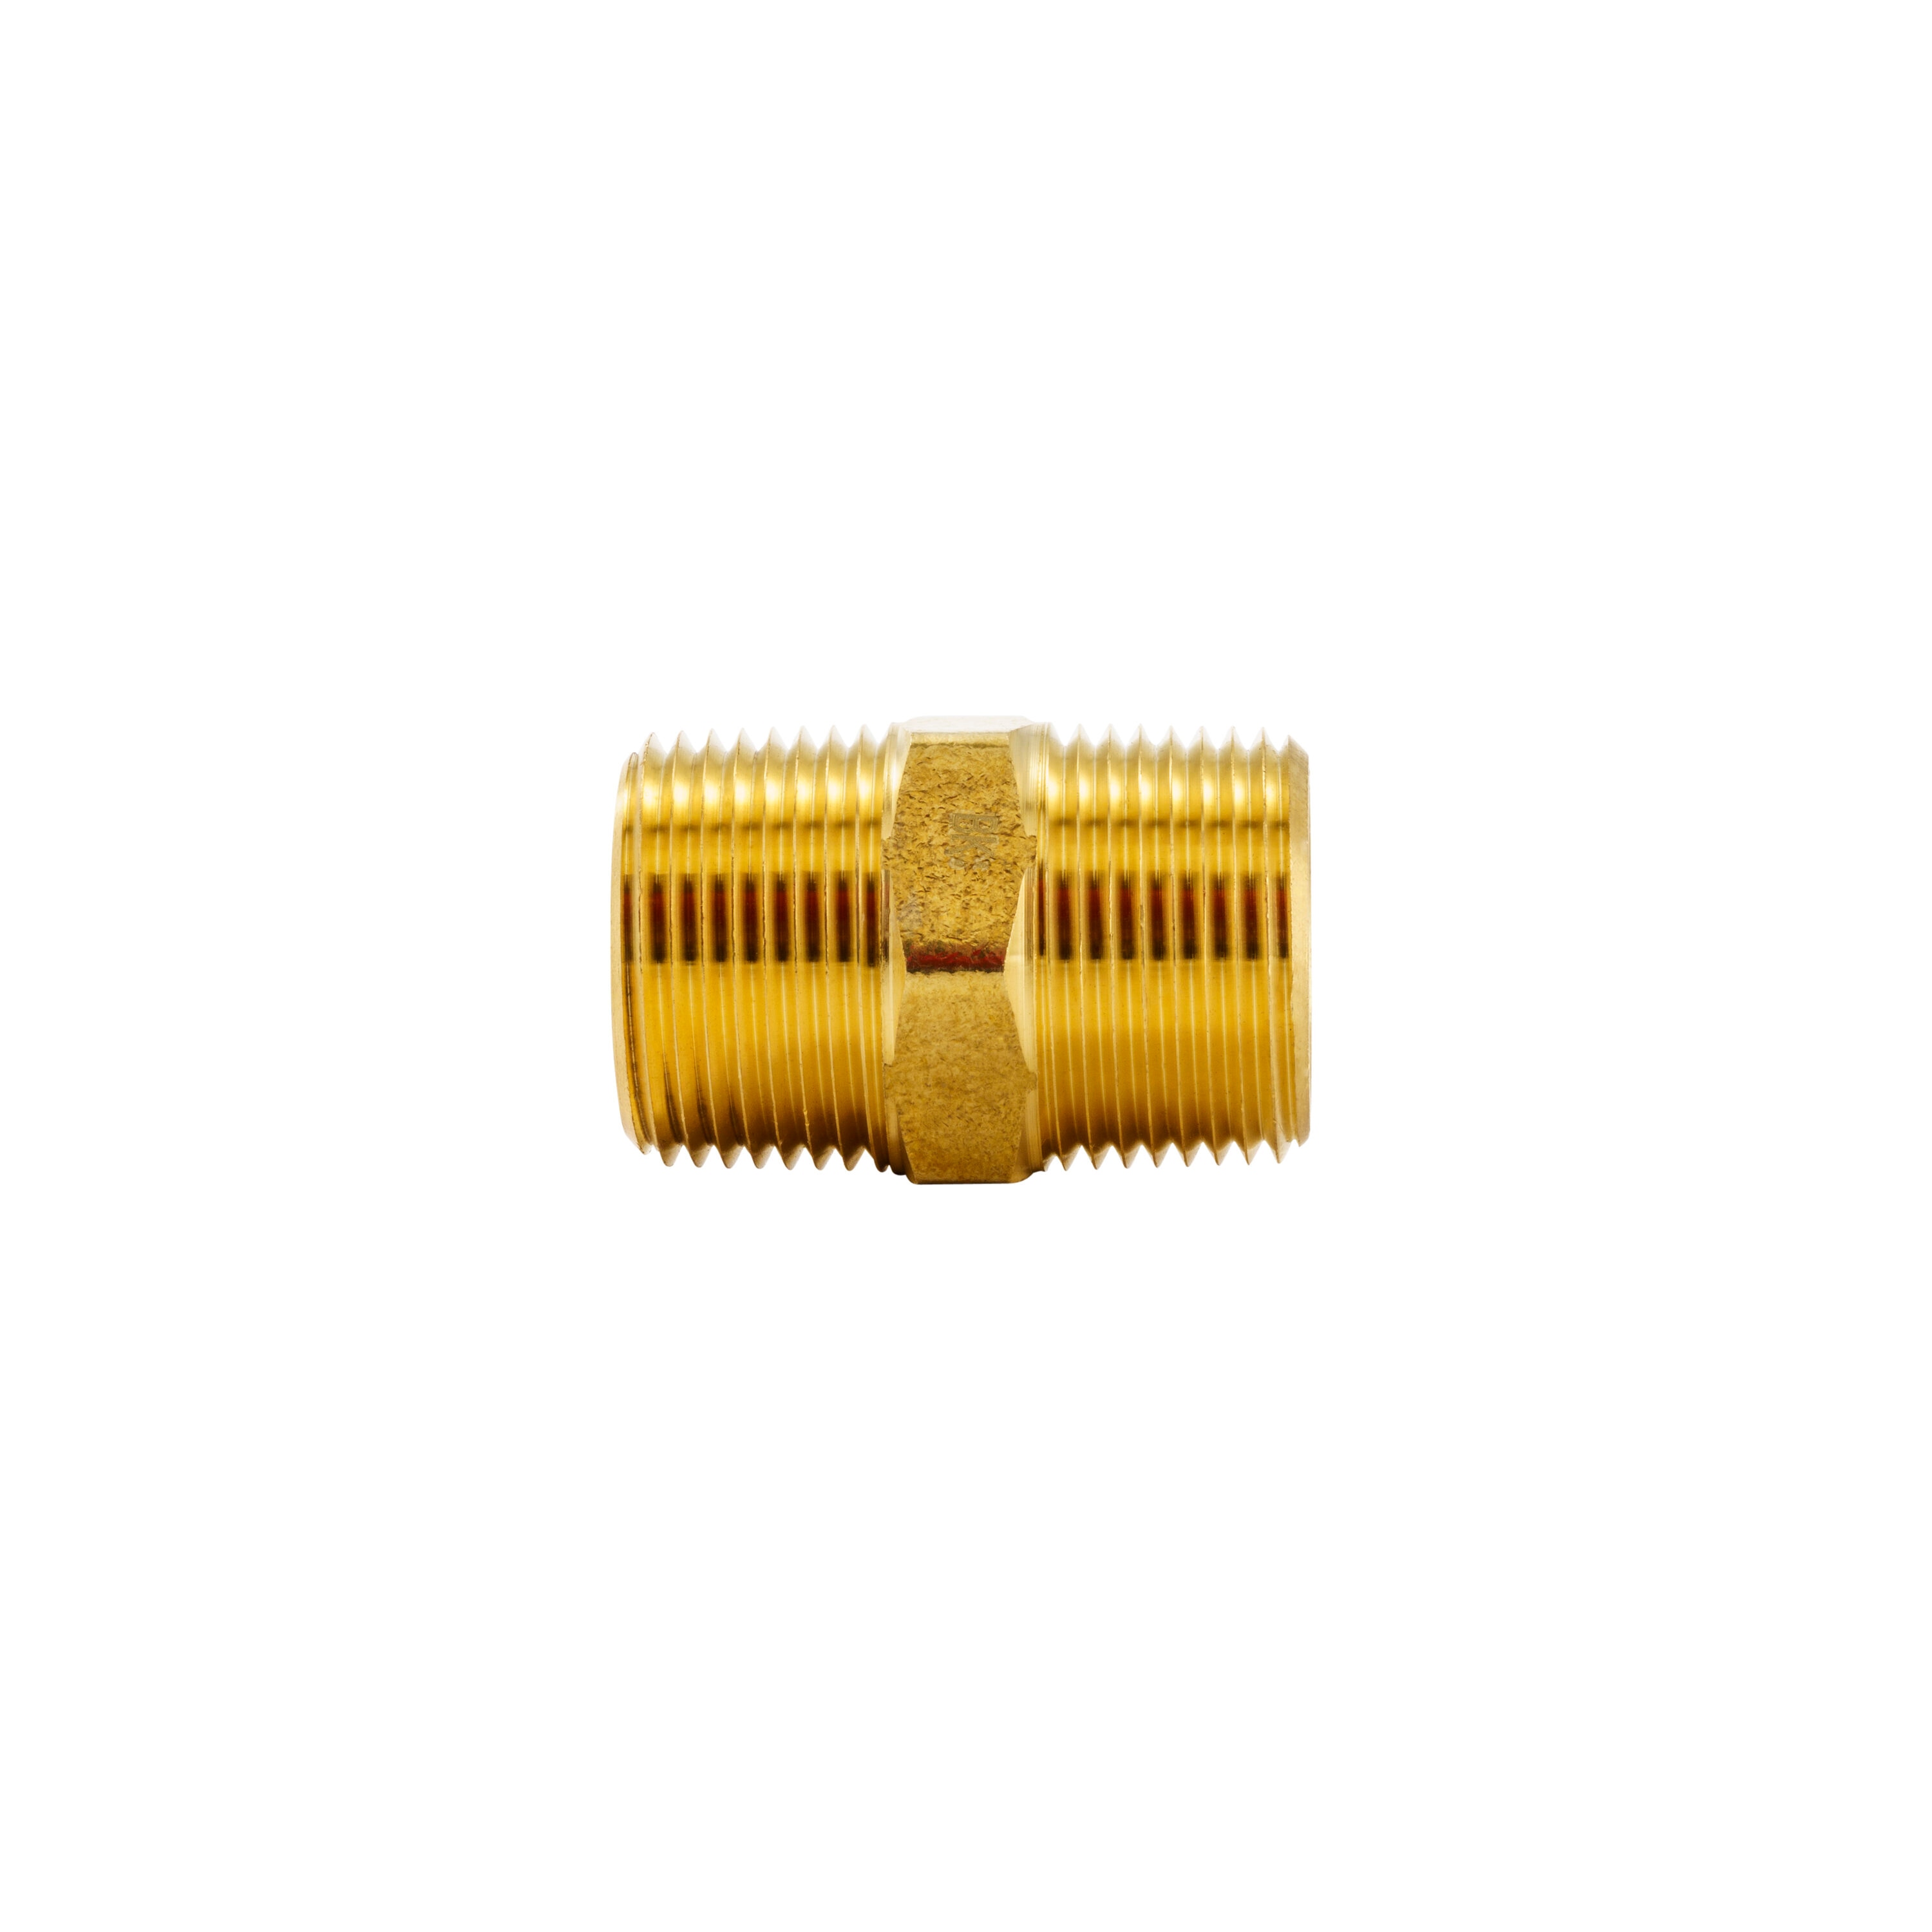 Proline Series 3/4-in x 3/4-in Threaded Female Adapter Fitting in